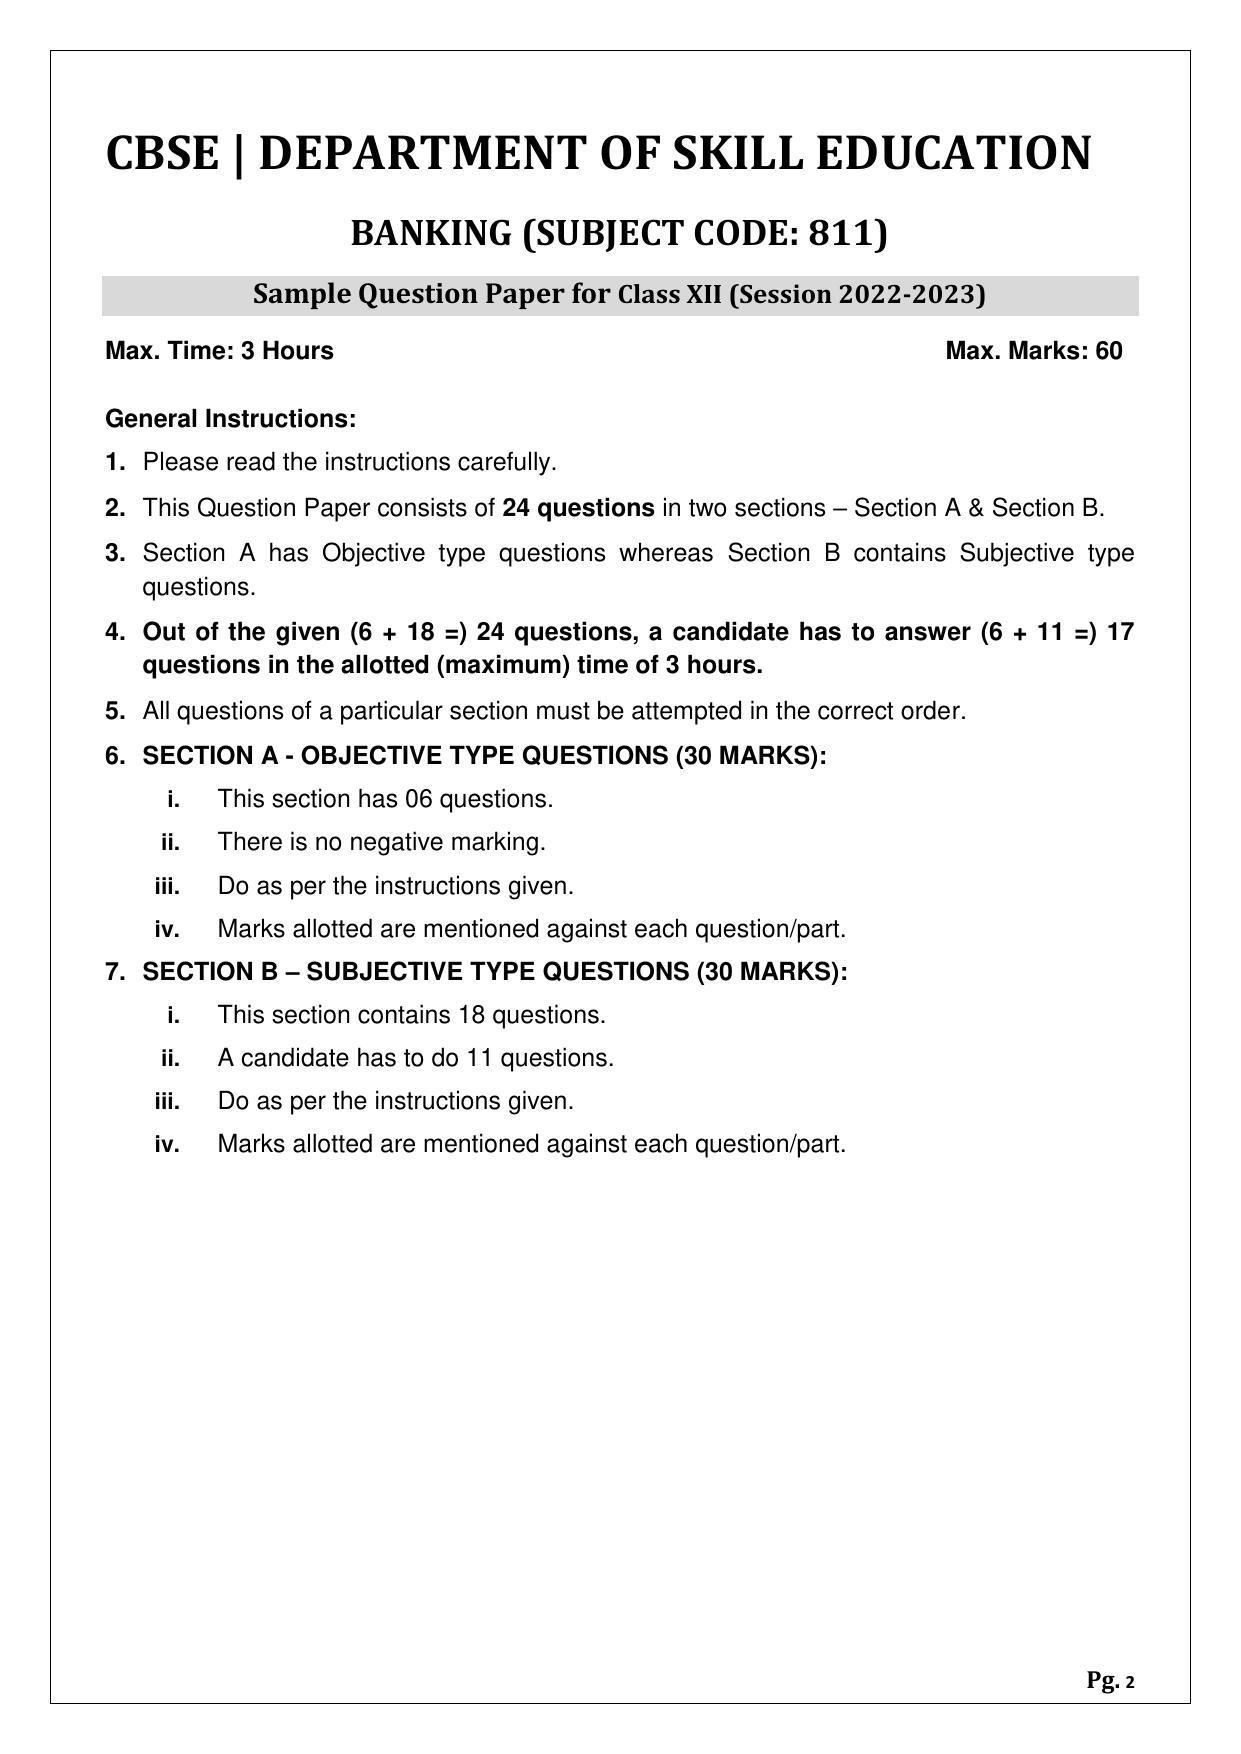 CBSE Class 12 Banking (Skill Education) Sample Papers 2023 - Page 2